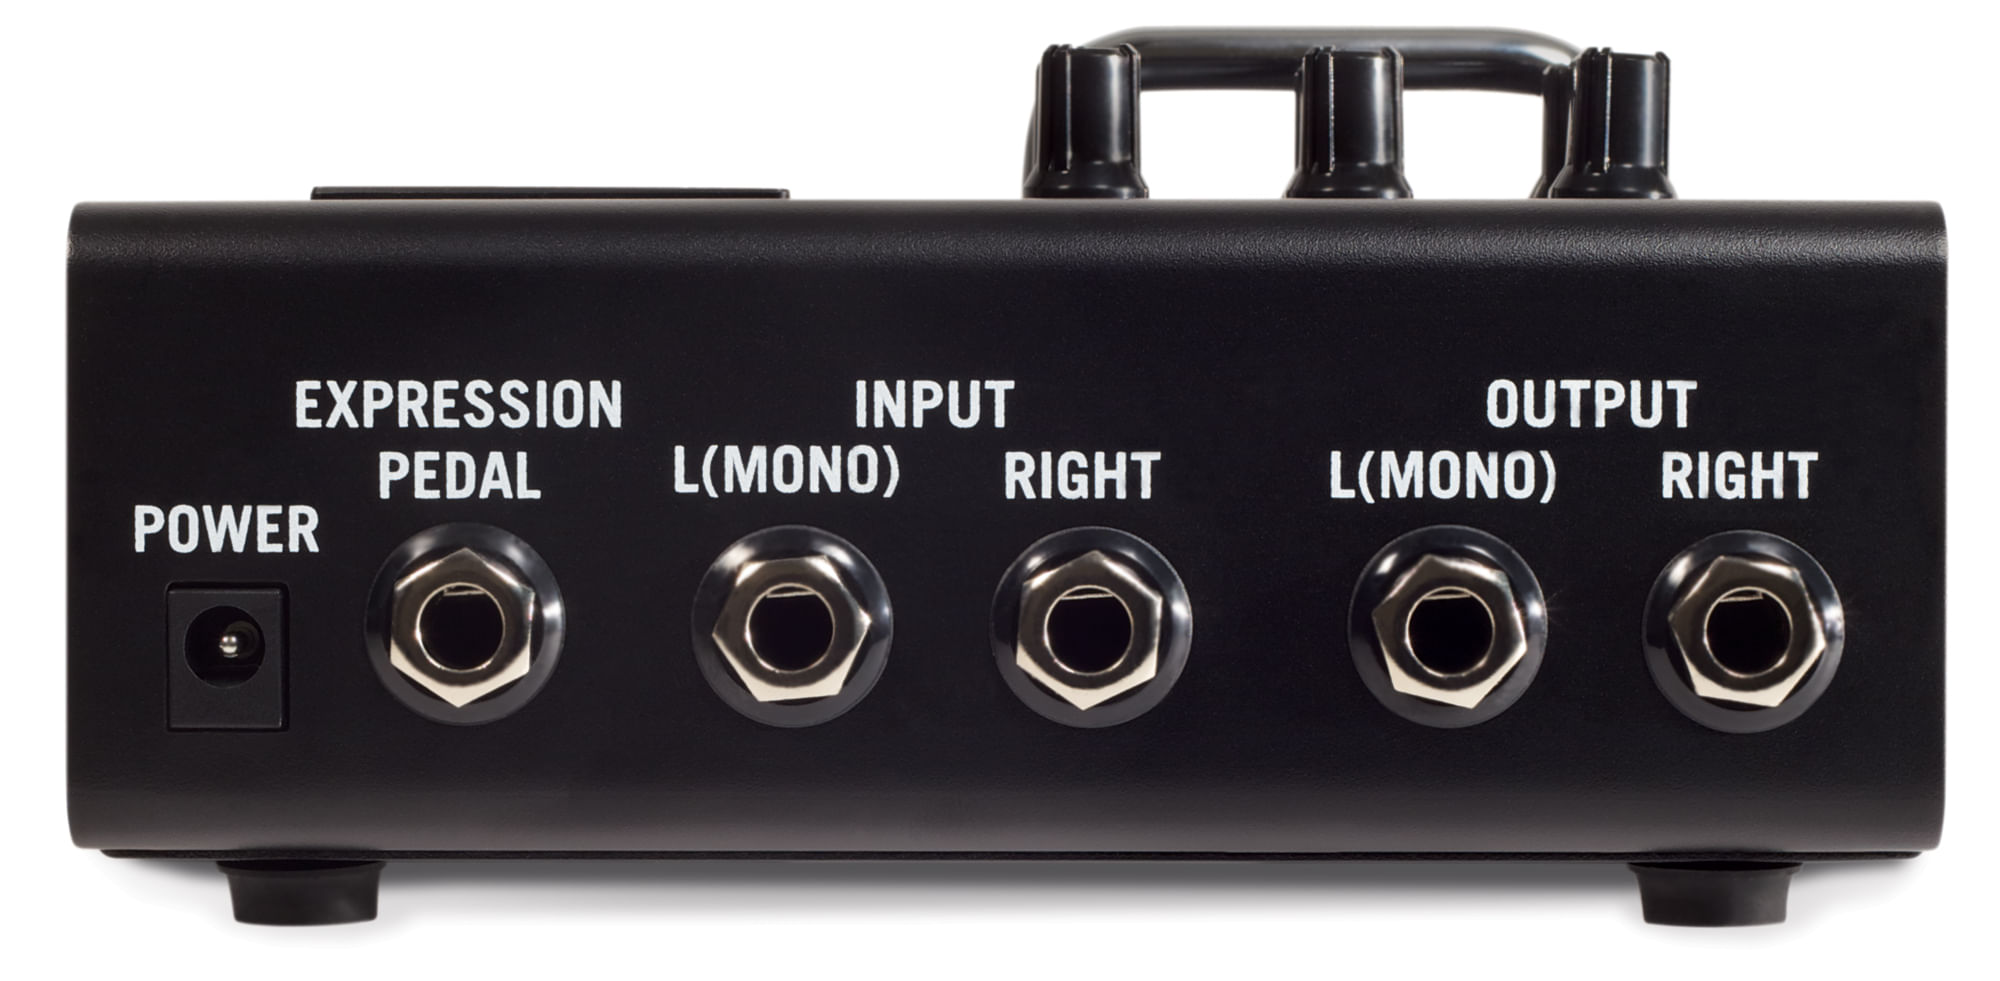 Line 6 M5 Stompbox Modeler Pedal - Cosmo Music